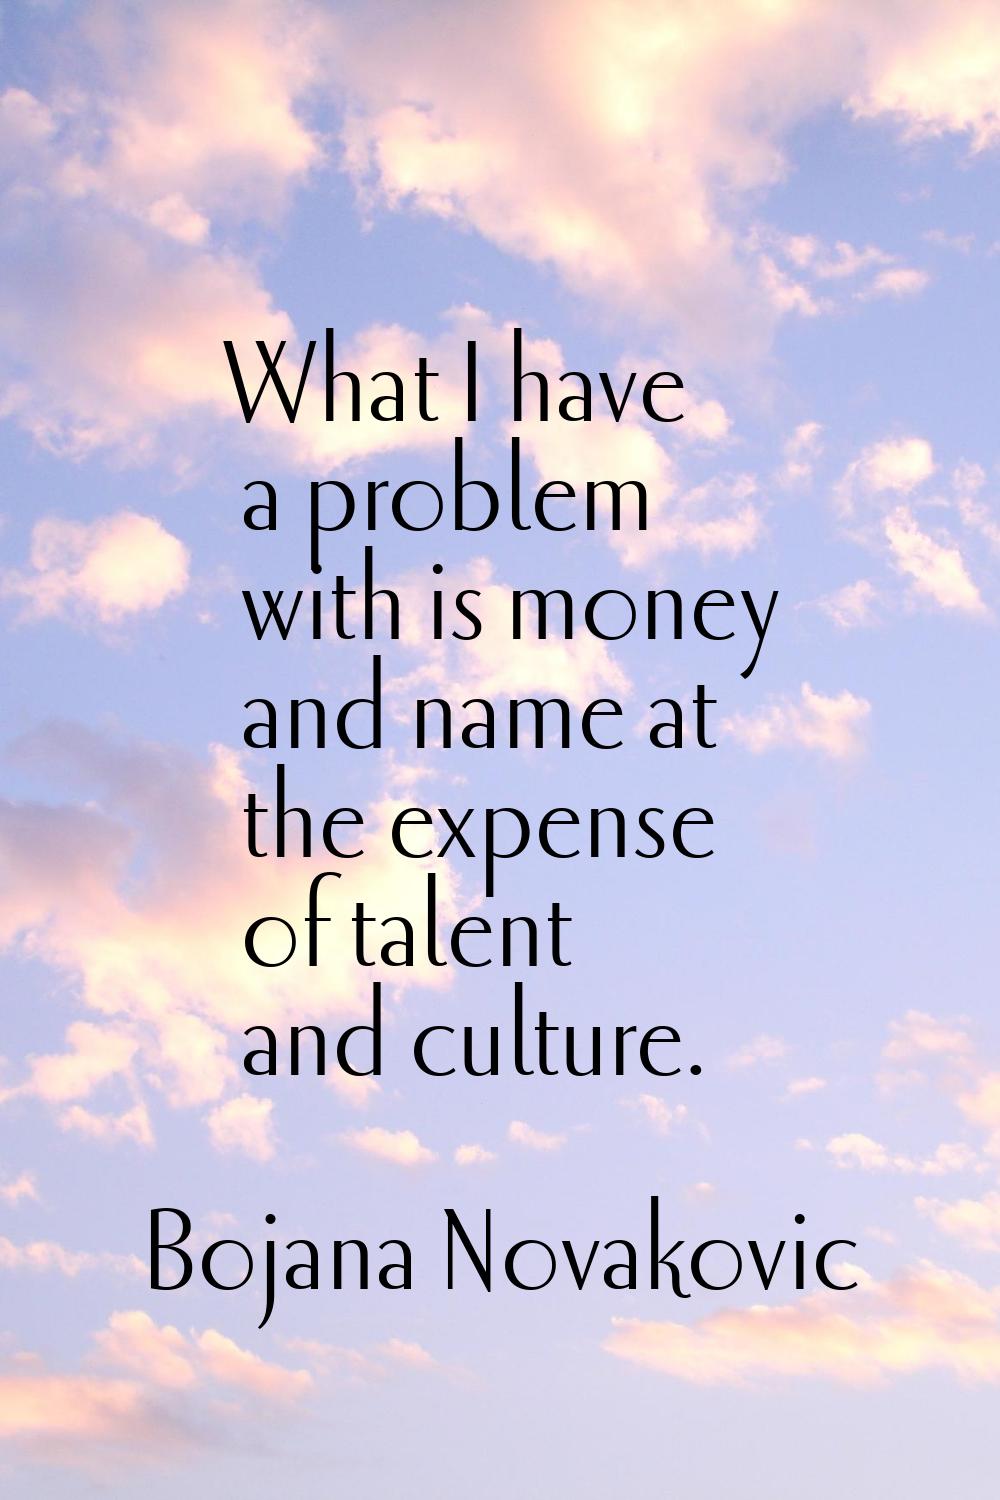 What I have a problem with is money and name at the expense of talent and culture.